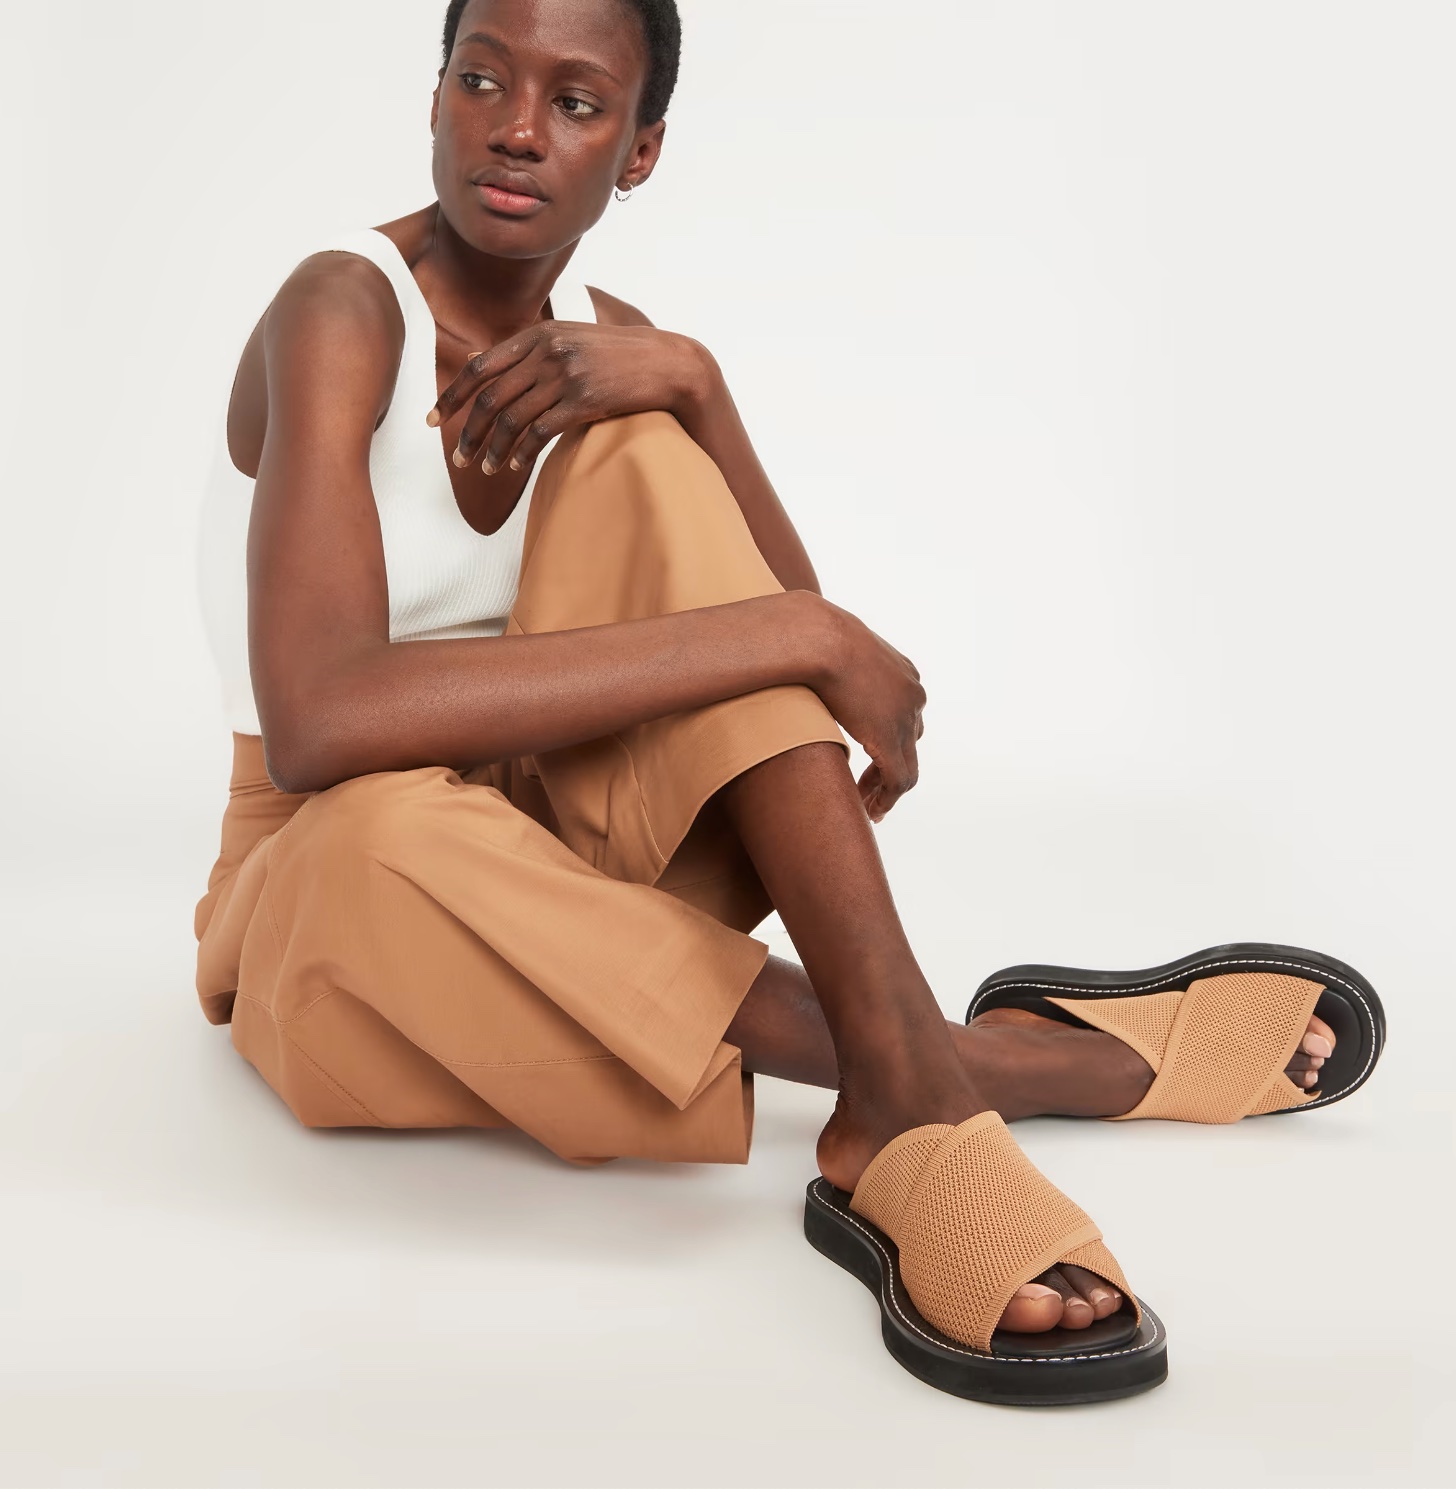 A model sits with her legs crossed, wearing Everlane sandals.